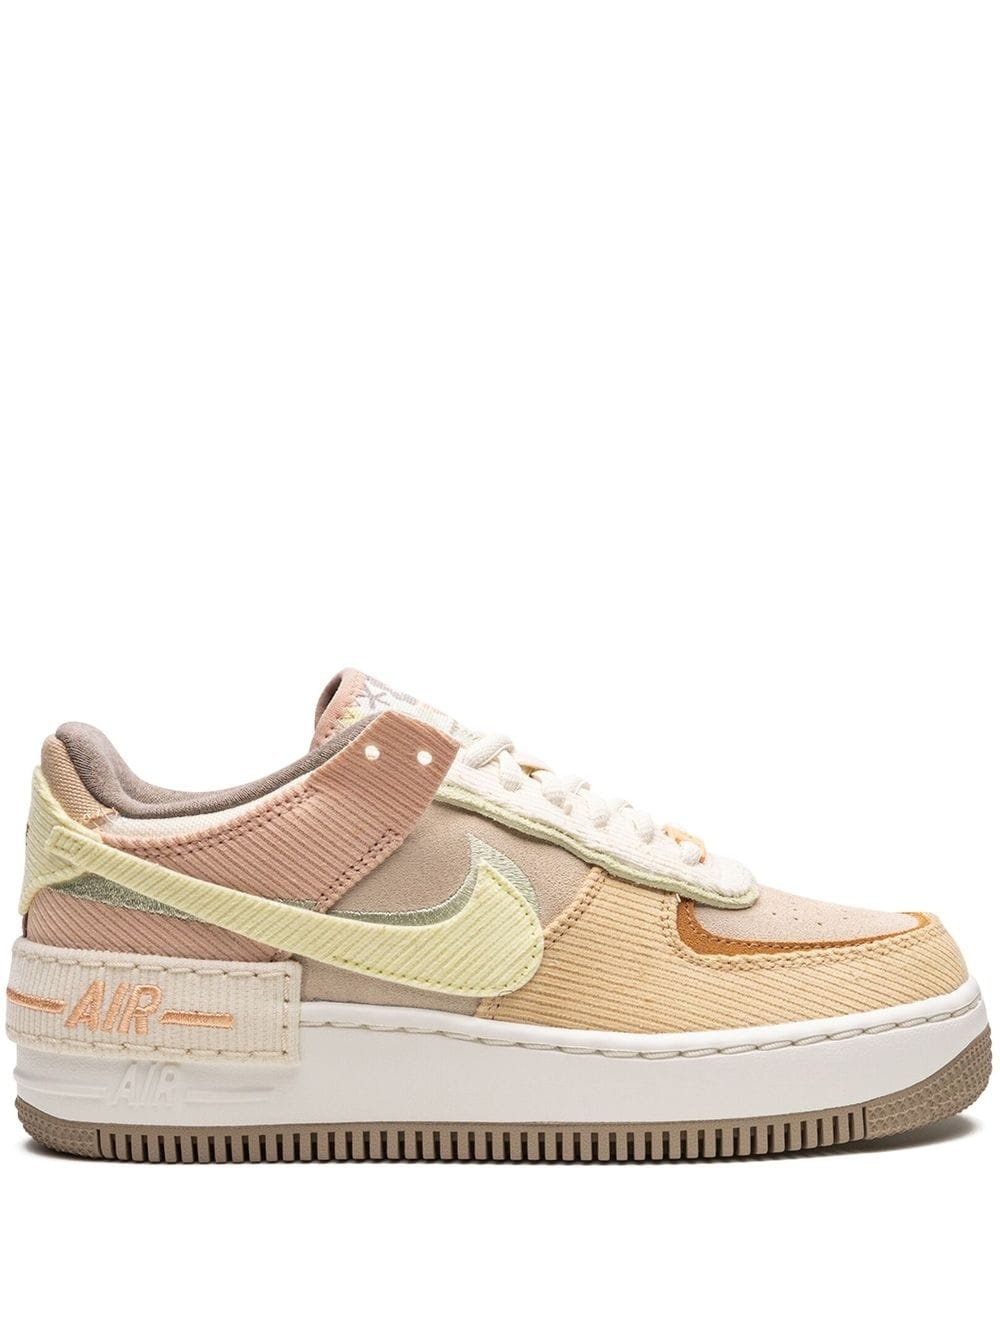 AF1 Shadow "Coconut Milk/Citron Tint" sneakers - 1